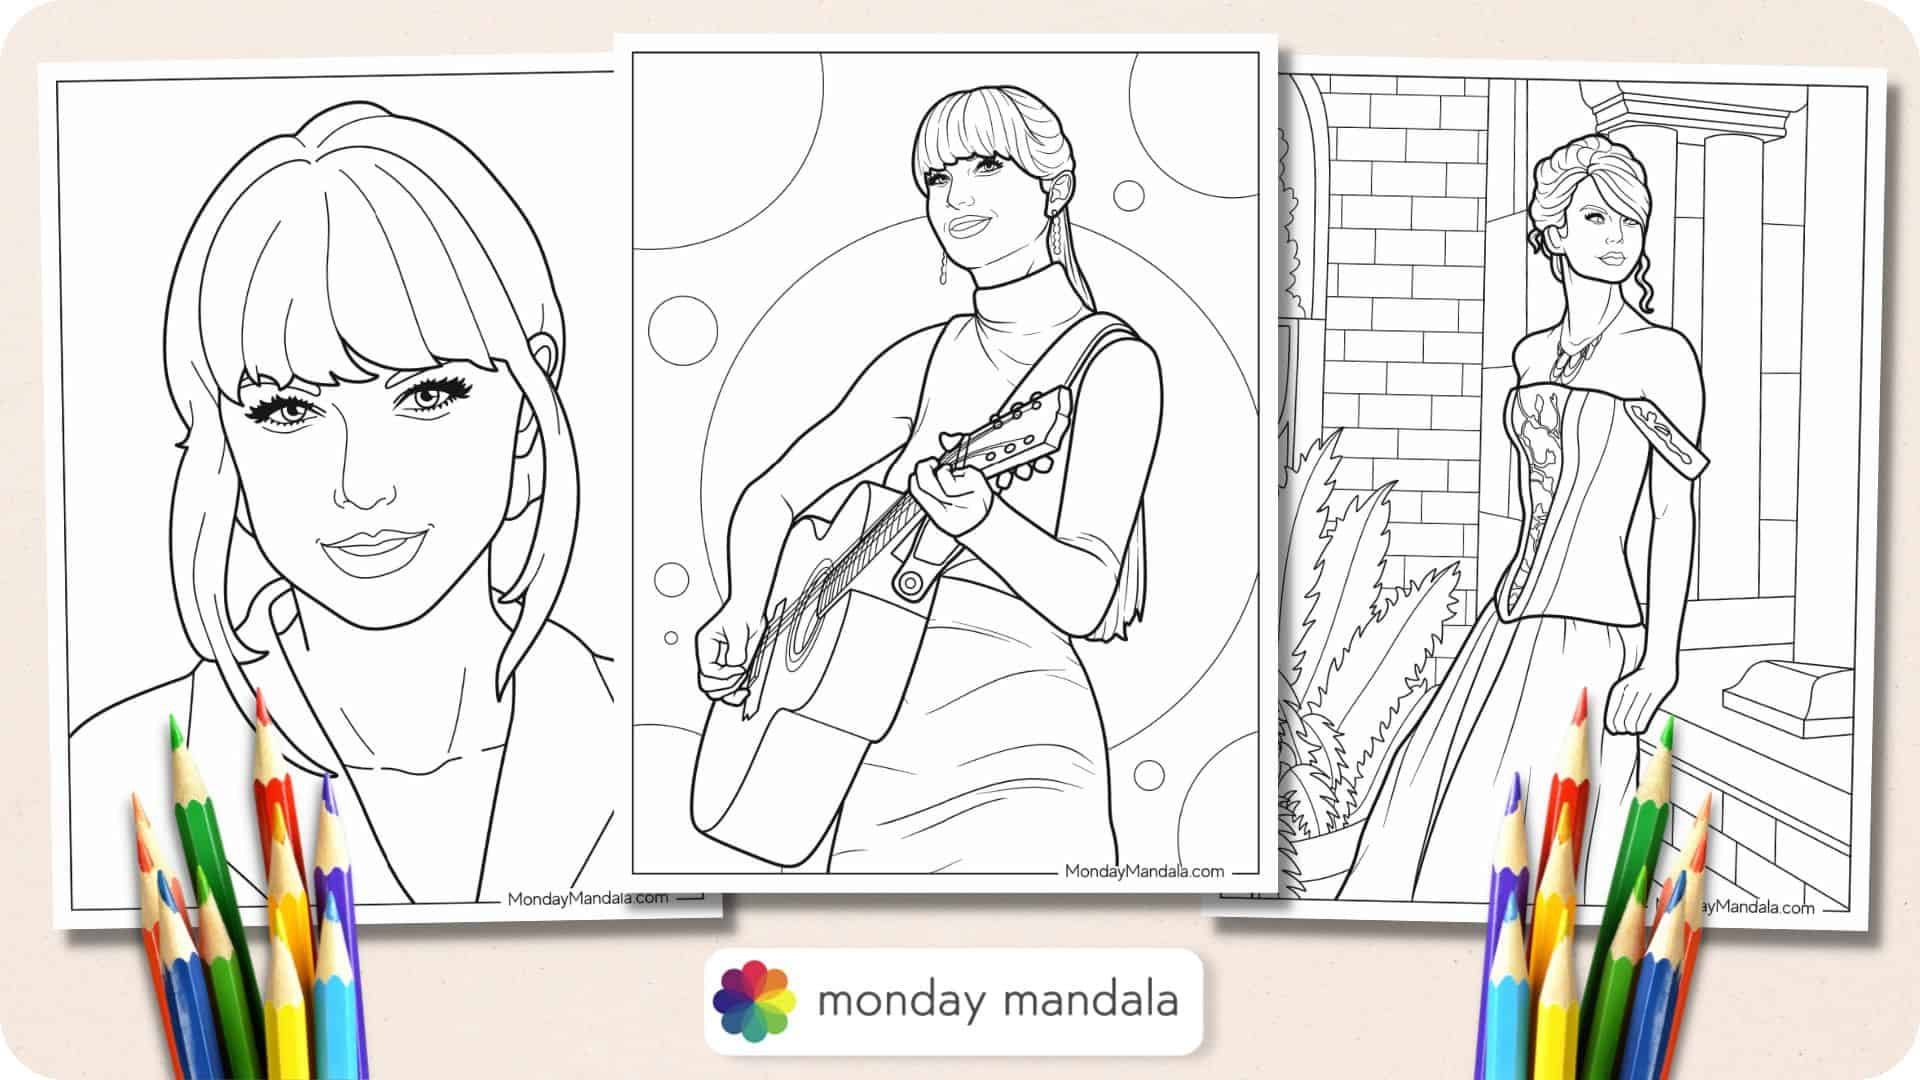 I illustrated taylor swift coloring pages that are free to printdownload please be gentle ð rtaylorswift